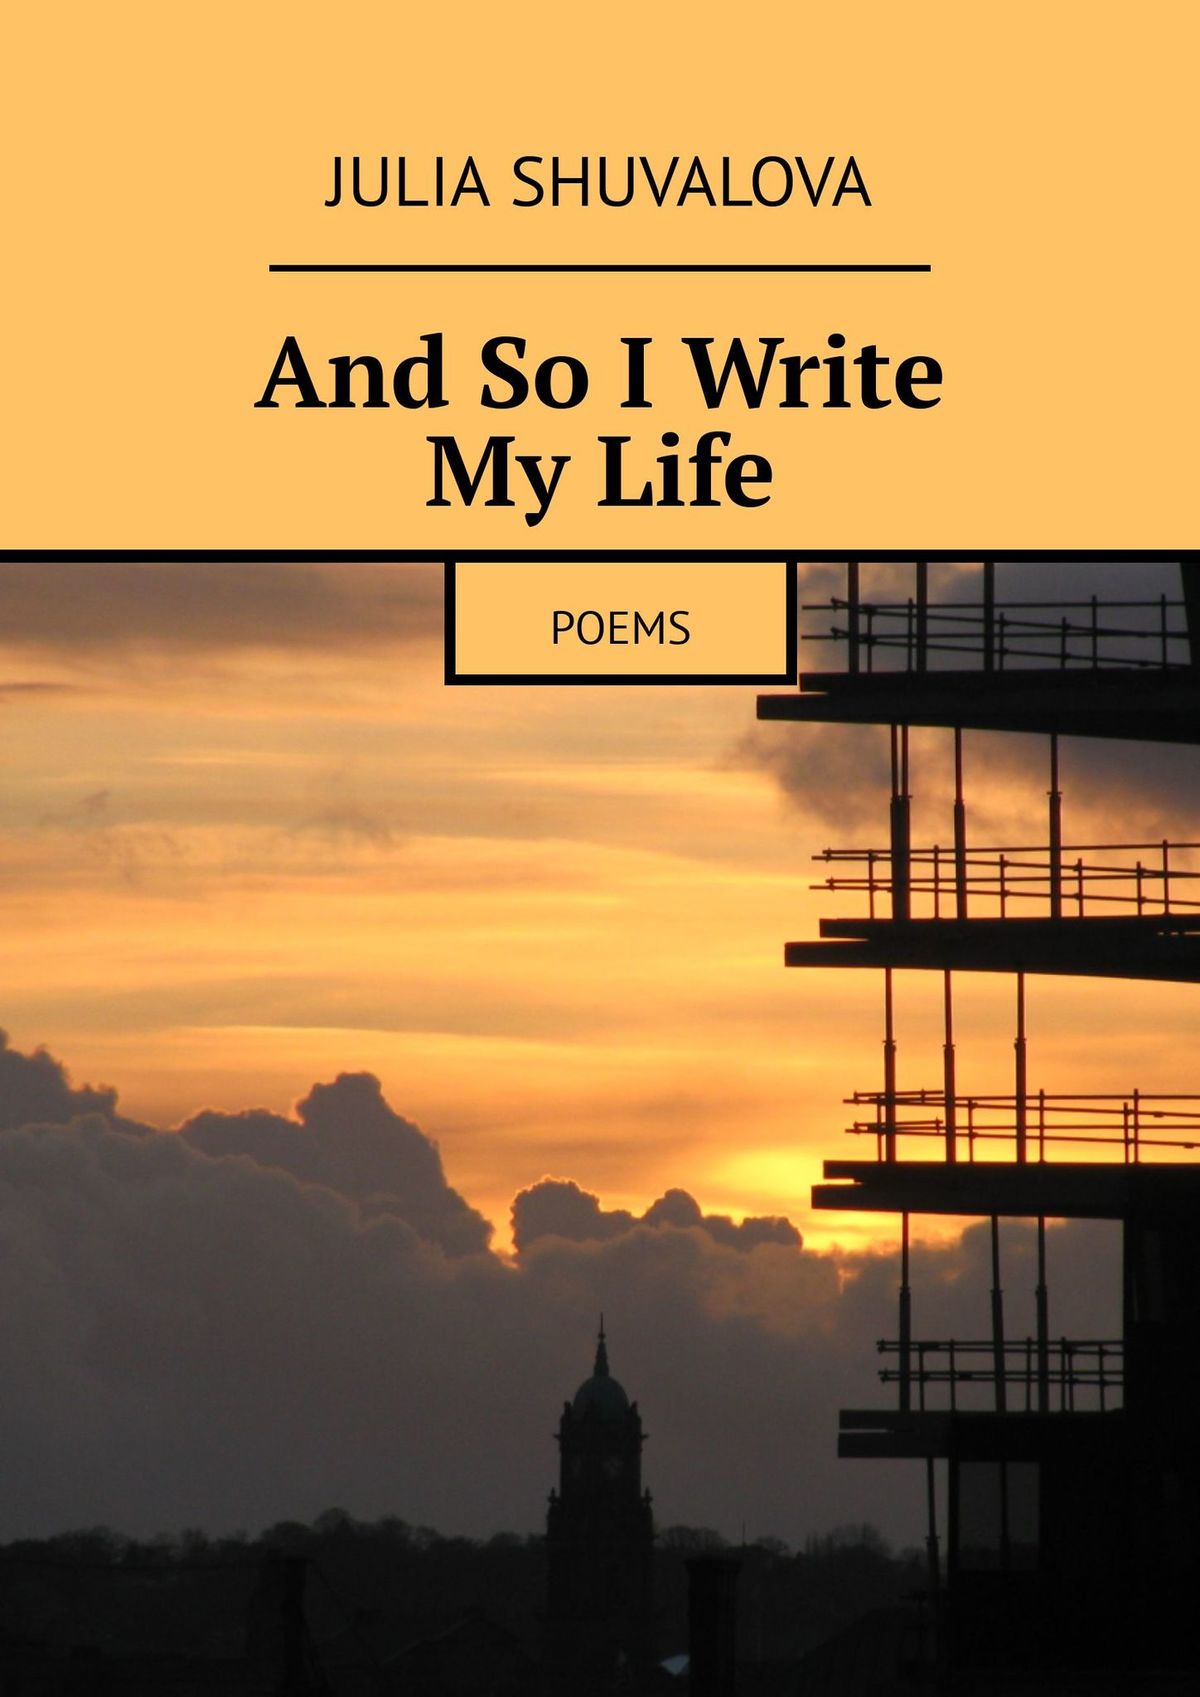 And So I Write My Life. Poems